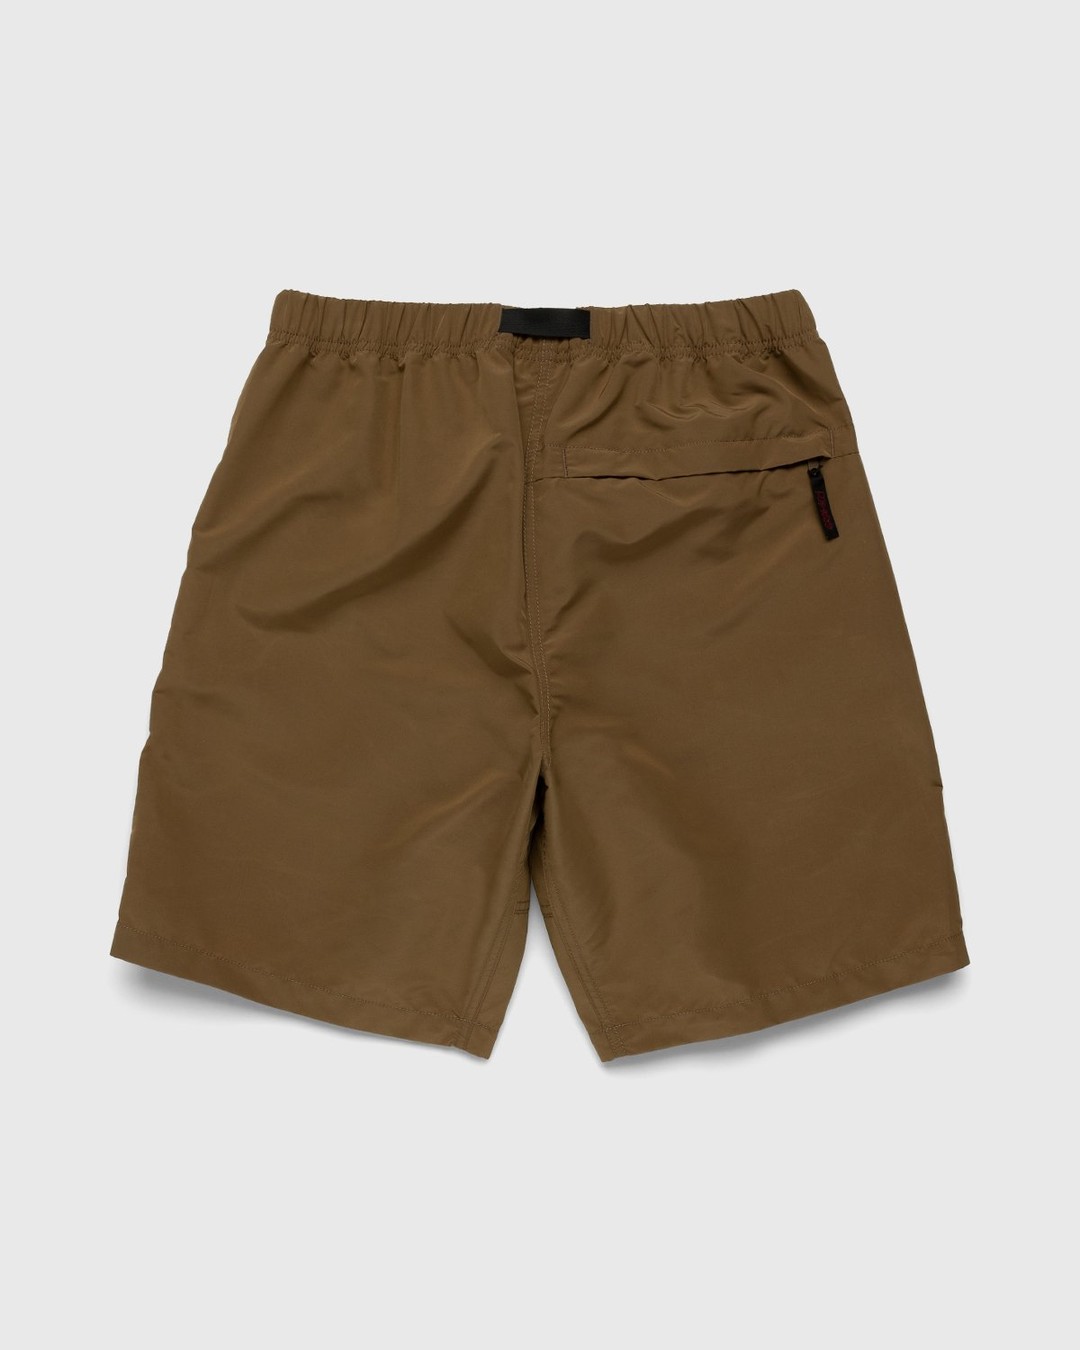 Gramicci x Highsnobiety – HS Sports Shell Packable Shorts Tan - Active Shorts - Brown - Image 2